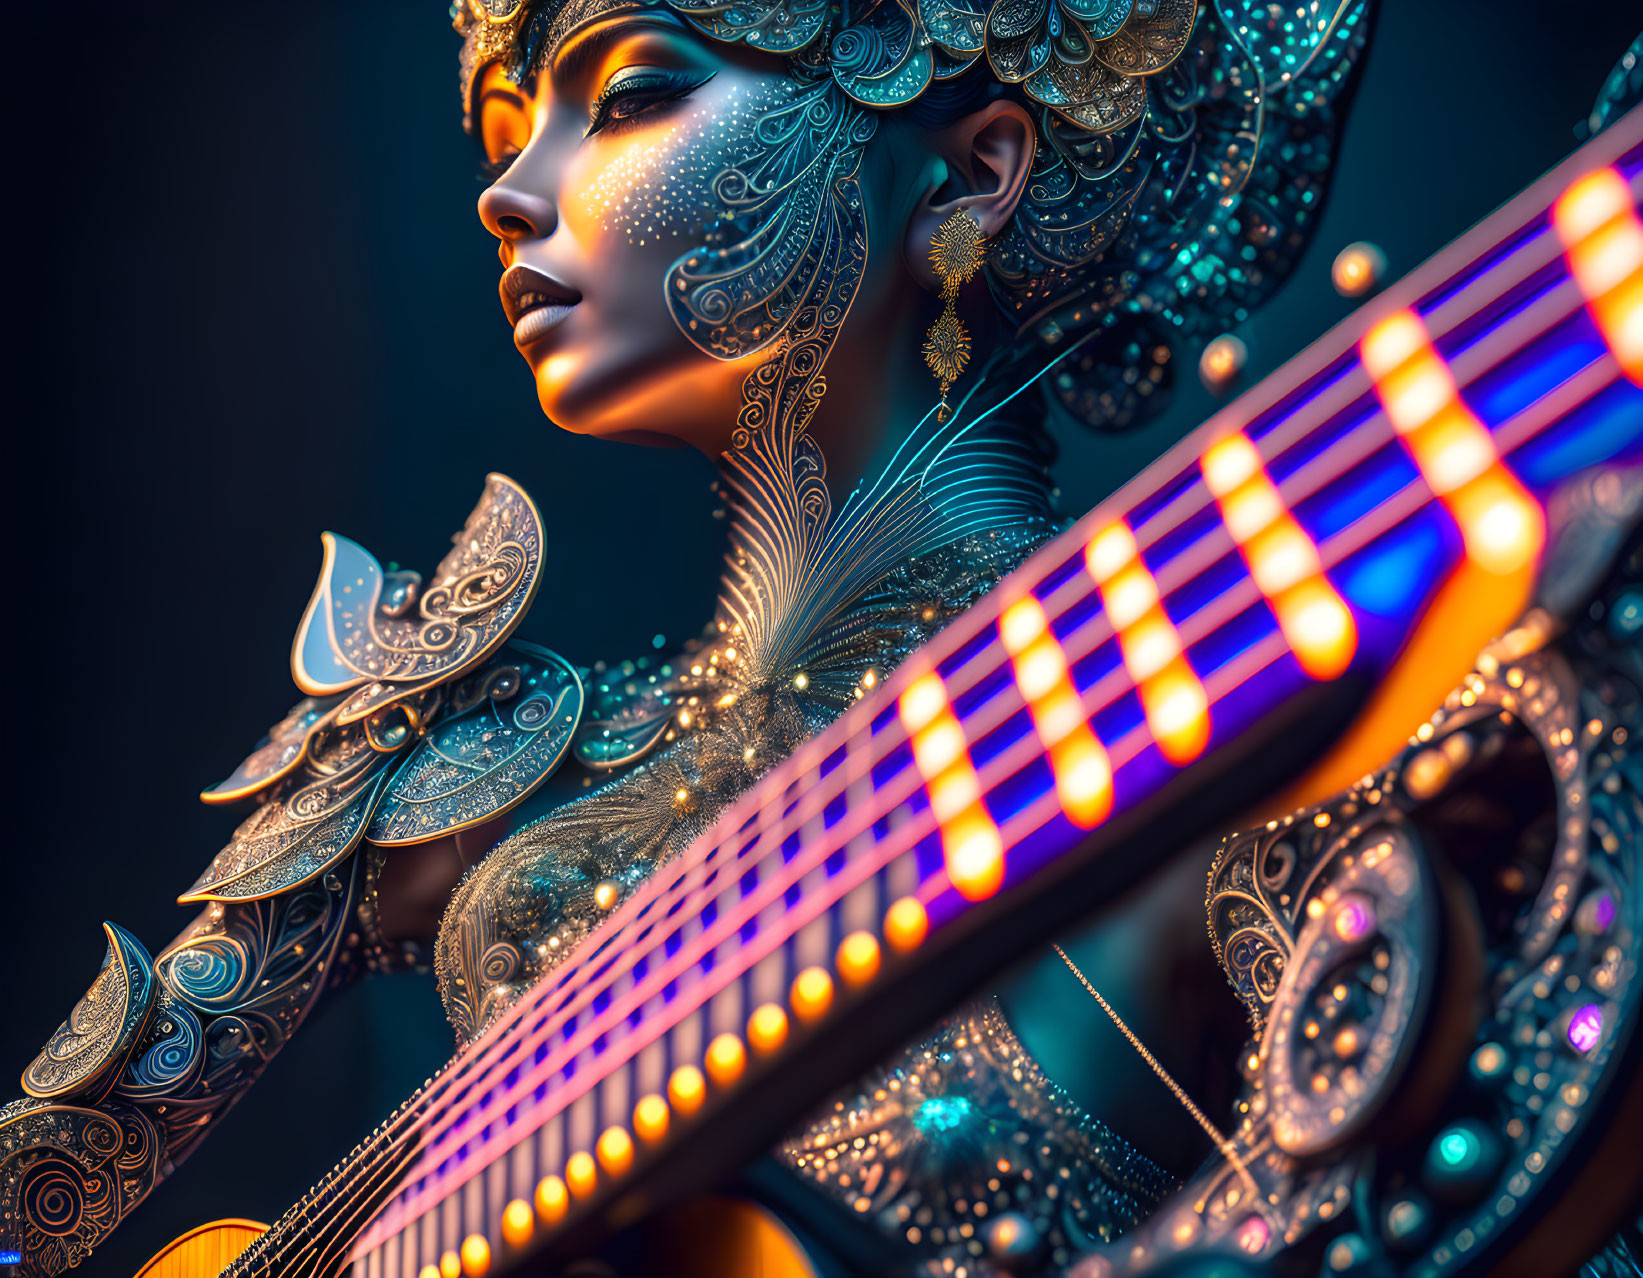 Detailed digital artwork of woman with ornate skin patterns, jewelry, guitar, and vibrant lighting